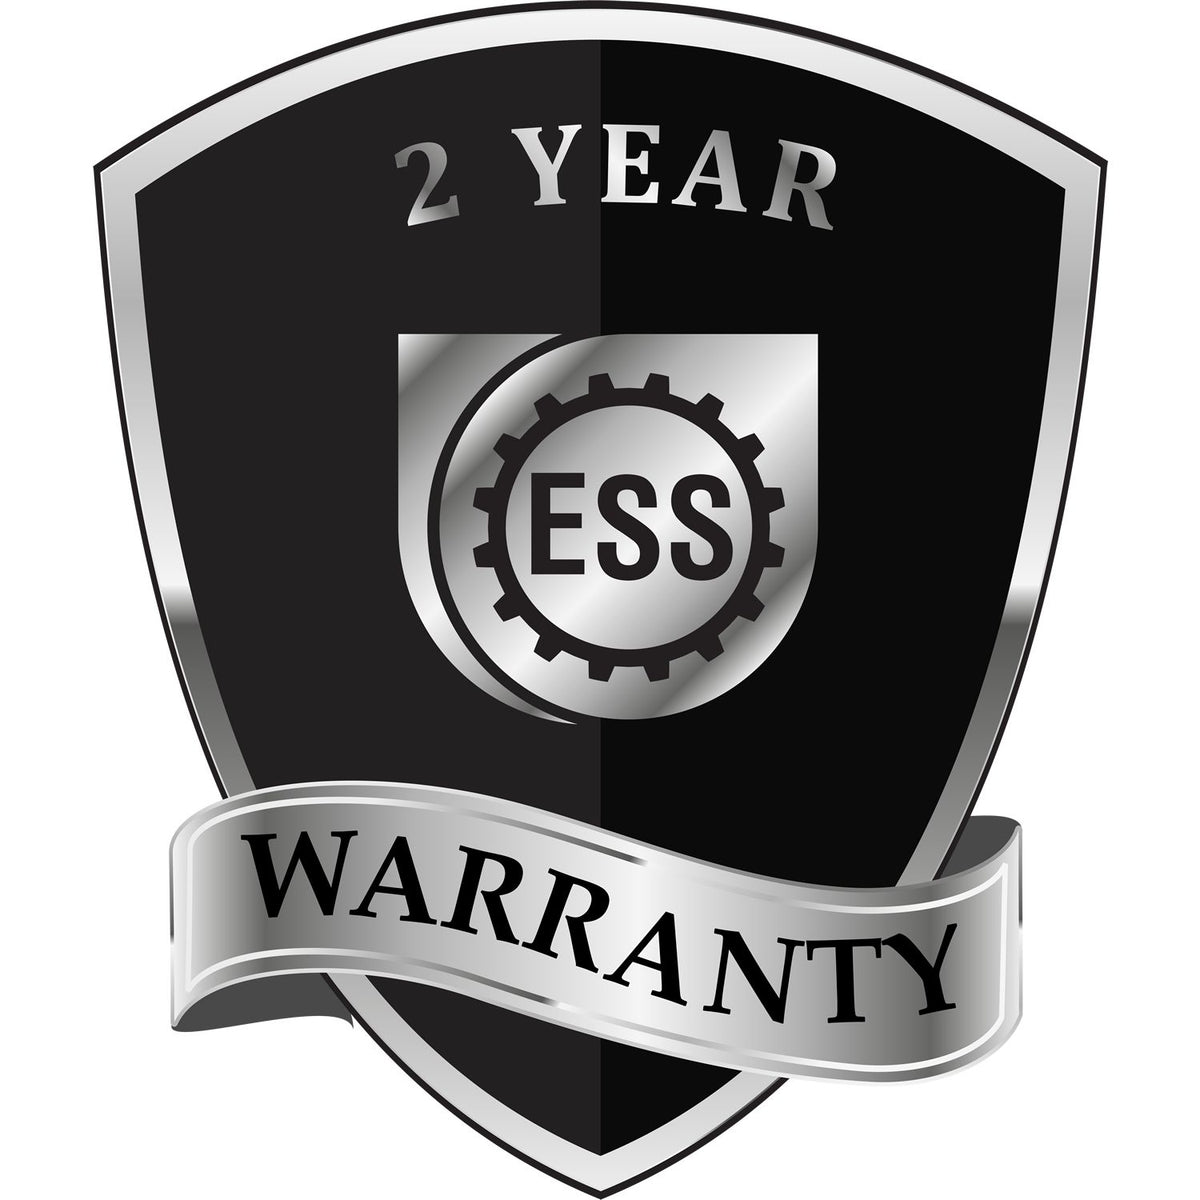 A badge or emblem showing a warranty icon for the Extended Long Reach West Virginia Architect Seal Embosser